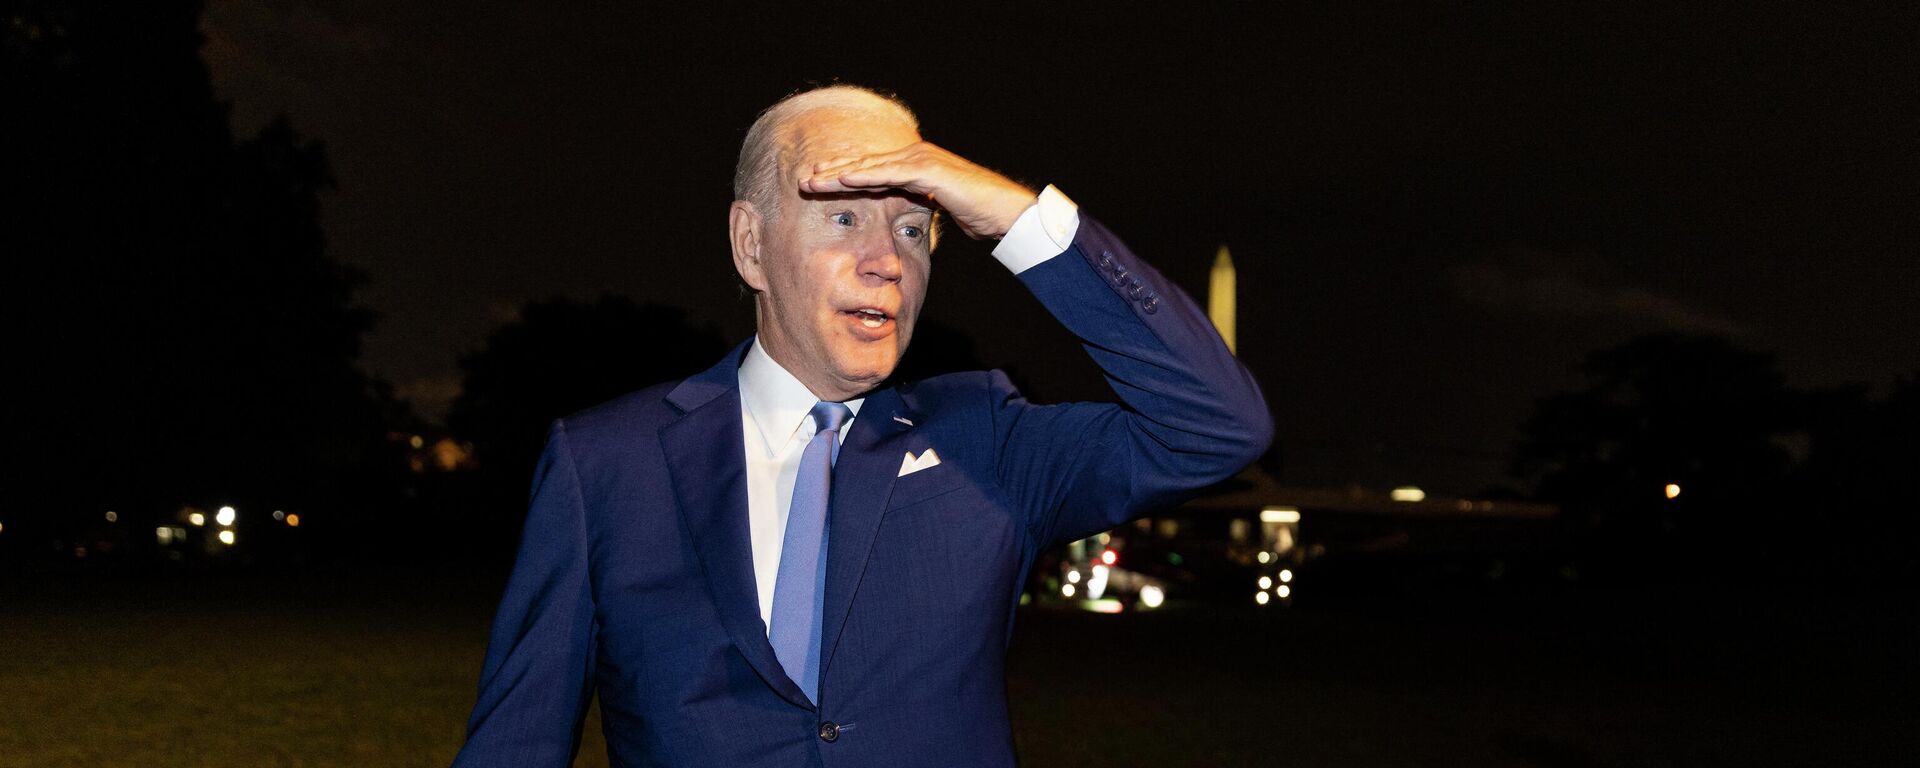 President Joe Biden takes reporters questions on the south lawn of the White House on July 16, 2022 in Washington, DC. - Sputnik International, 1920, 21.07.2022